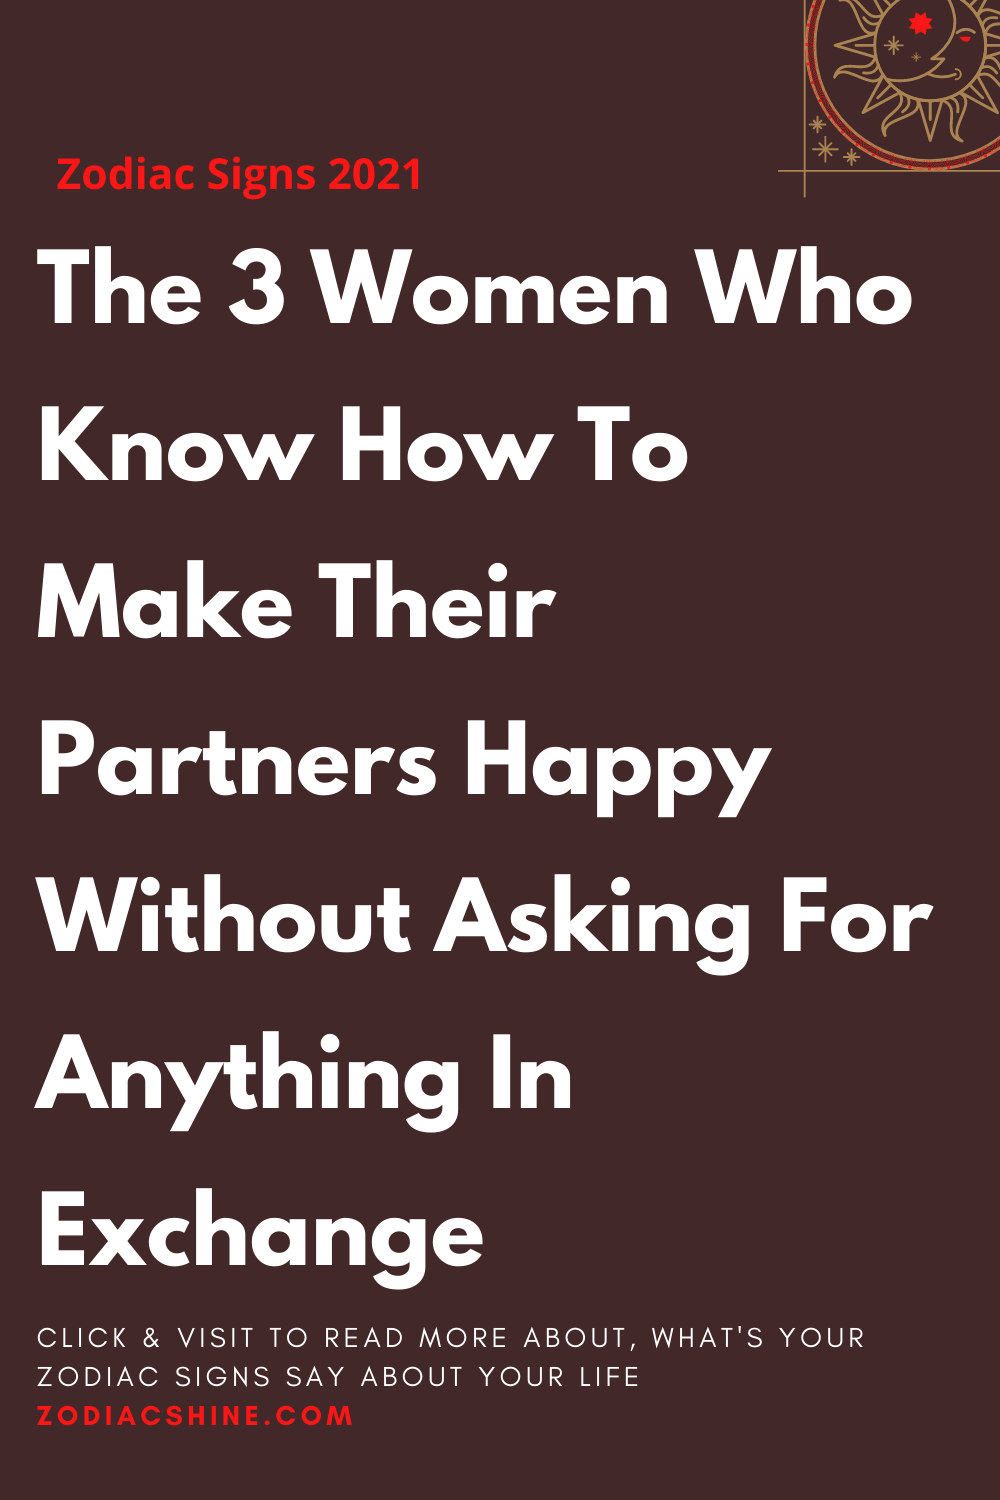 The 3 Women Who Know How To Make Their Partners Happy Without Asking For Anything In Exchange